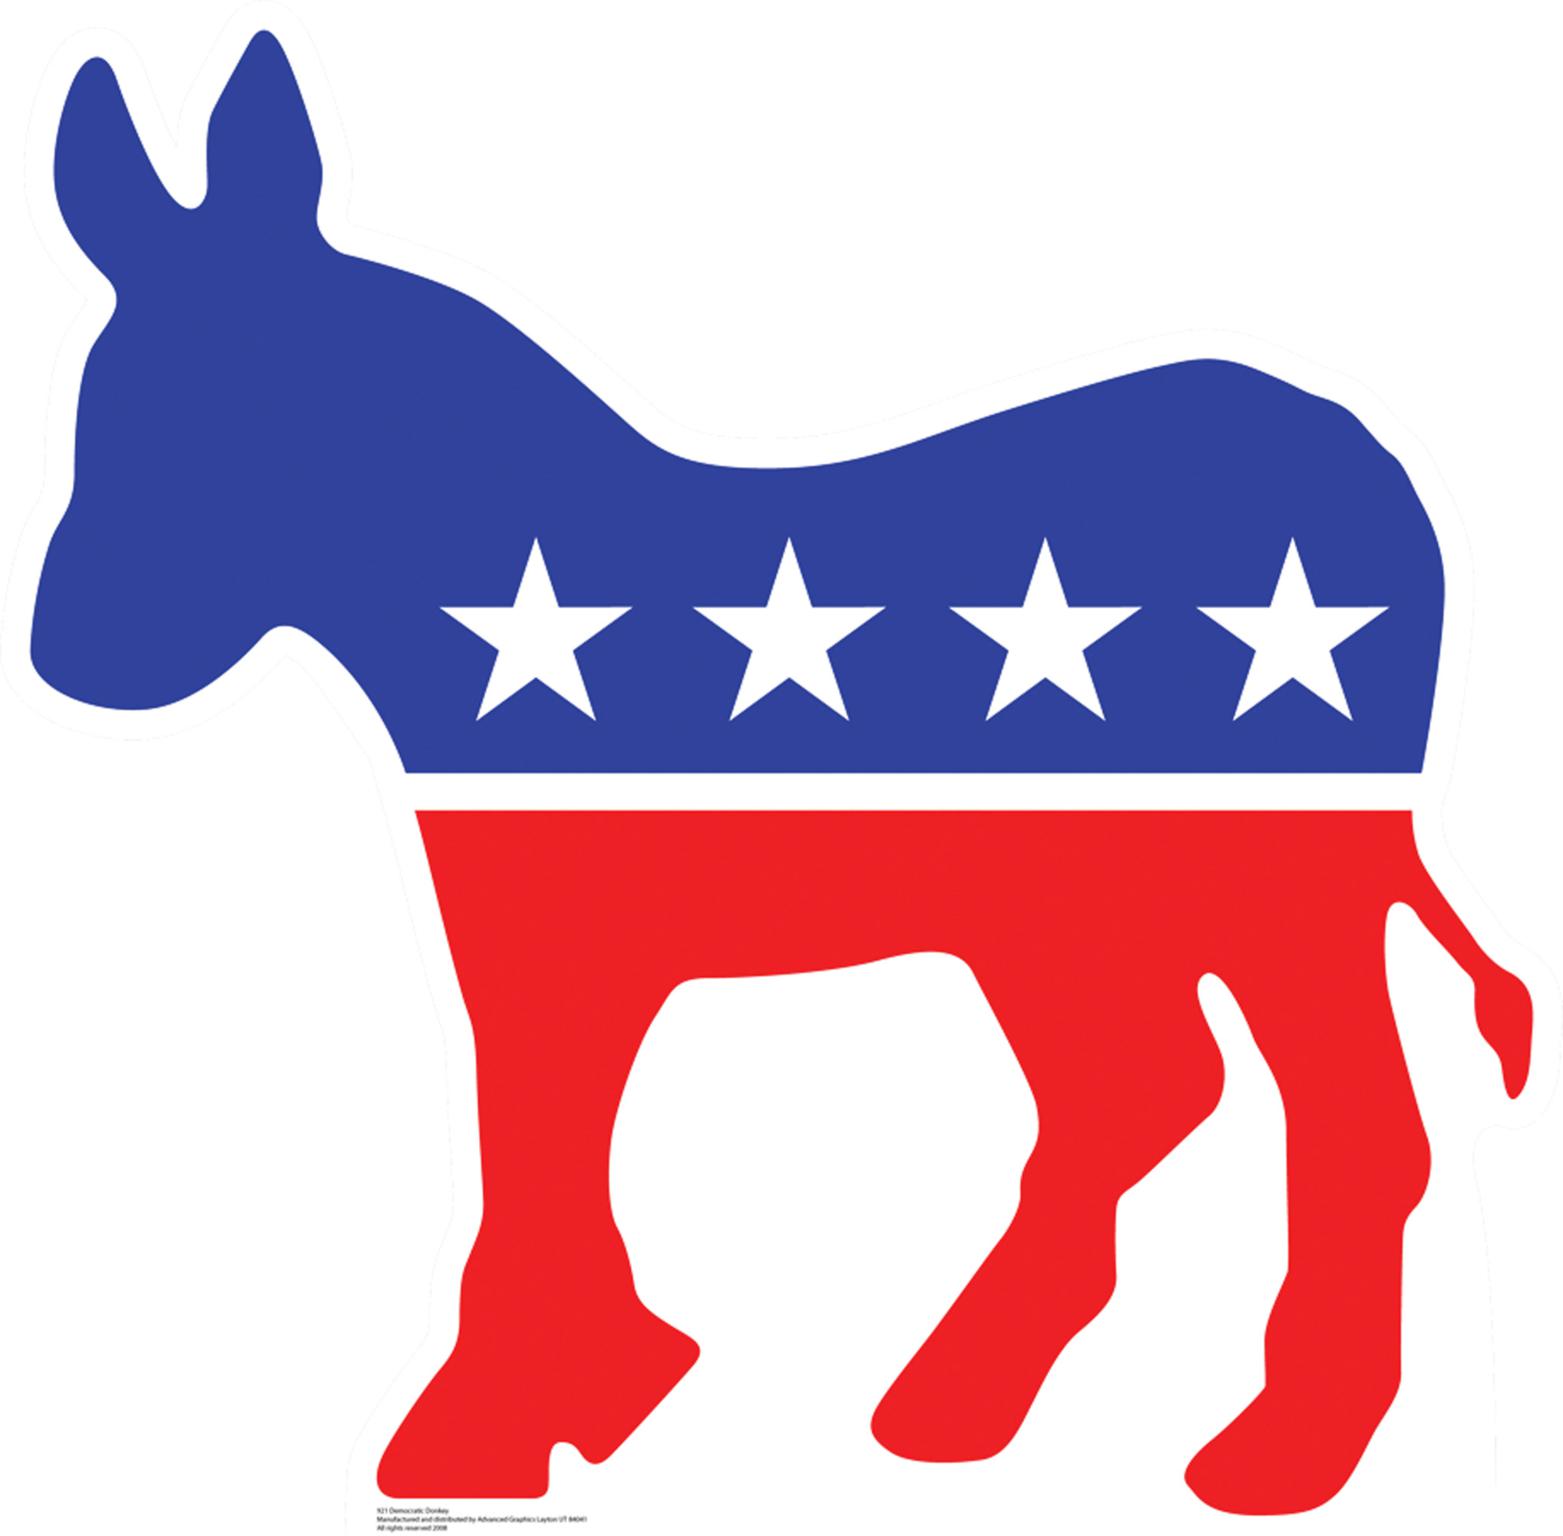 democratic party logo | Logospike.com: Famous and Free Vector Logos